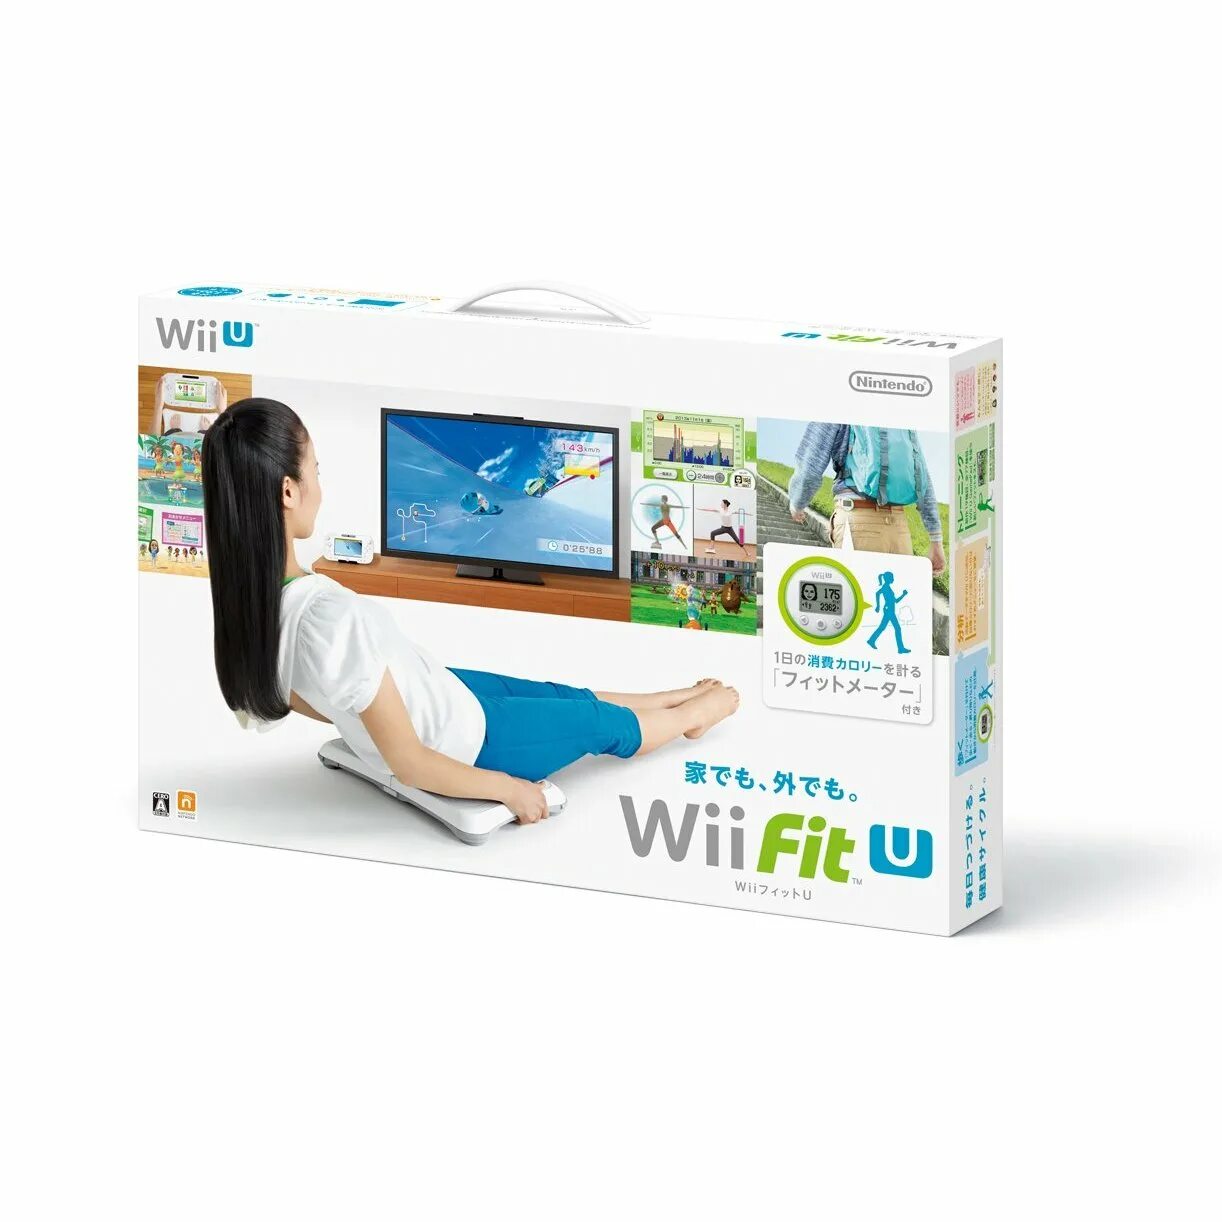 Wii Fit u Wii. Wii Fit u Nintendo Wii u. Nintendo Wii Trainer Fit 18. Wii Fit feet.